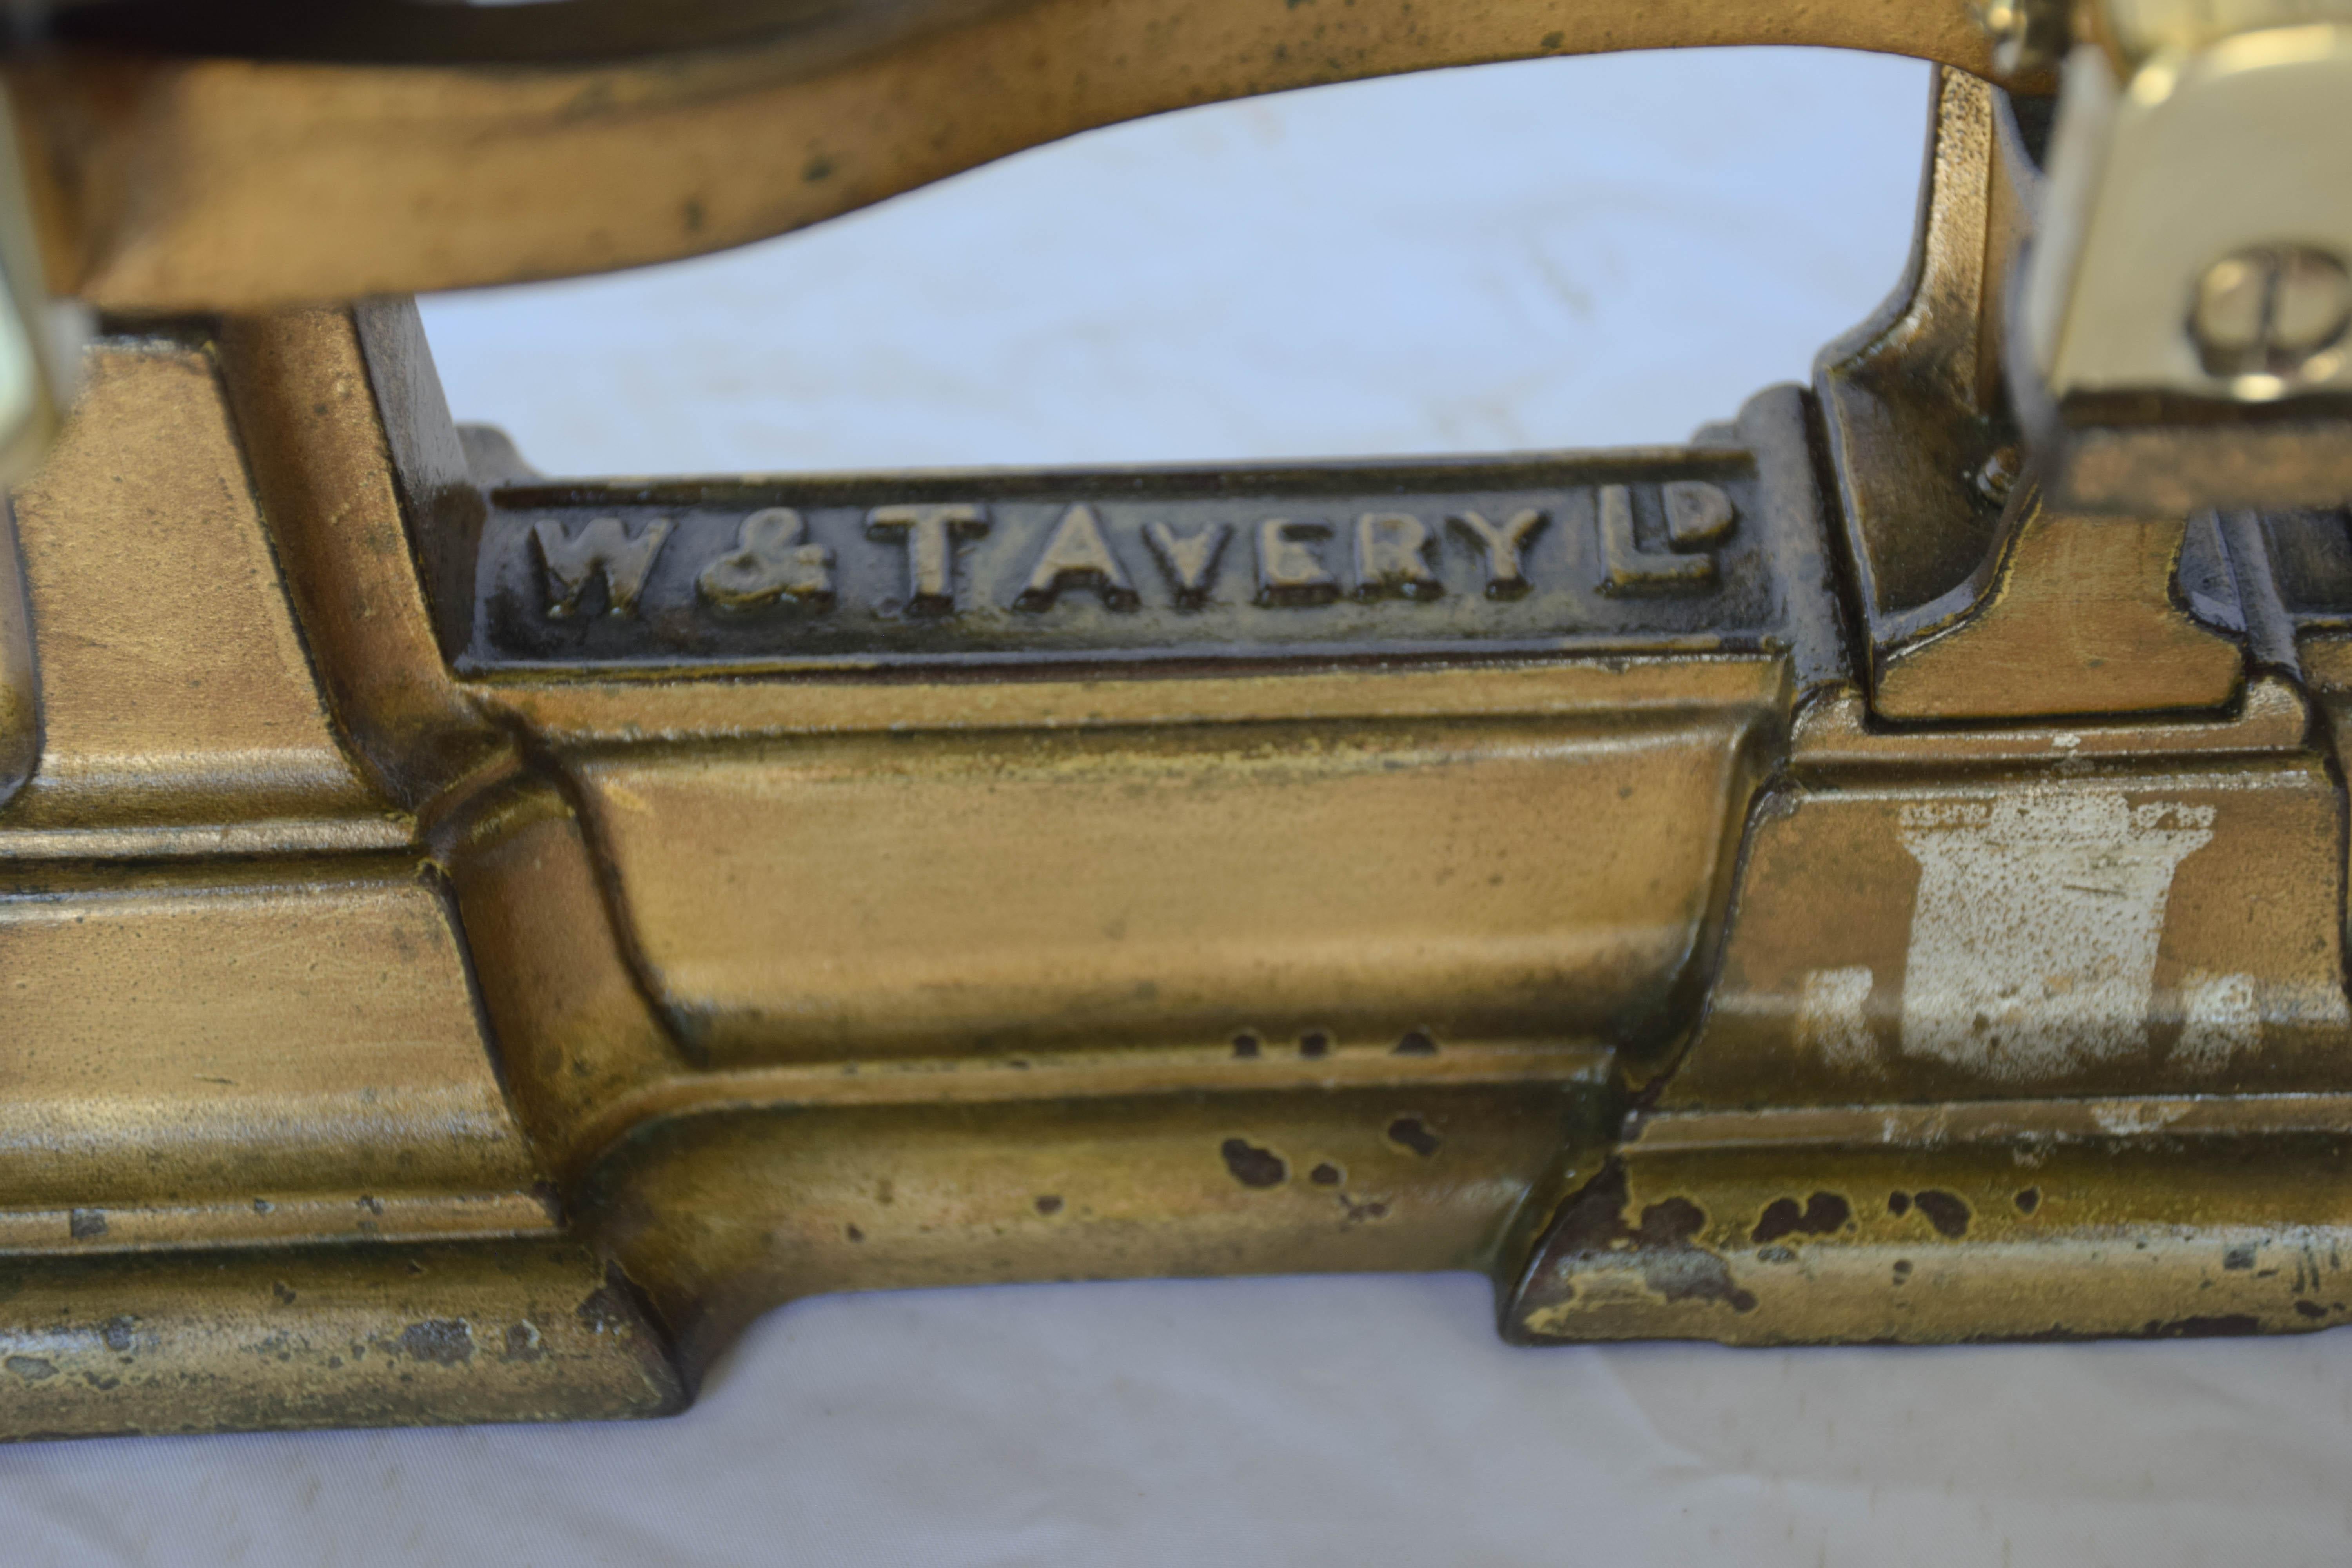 w & t avery scales antique